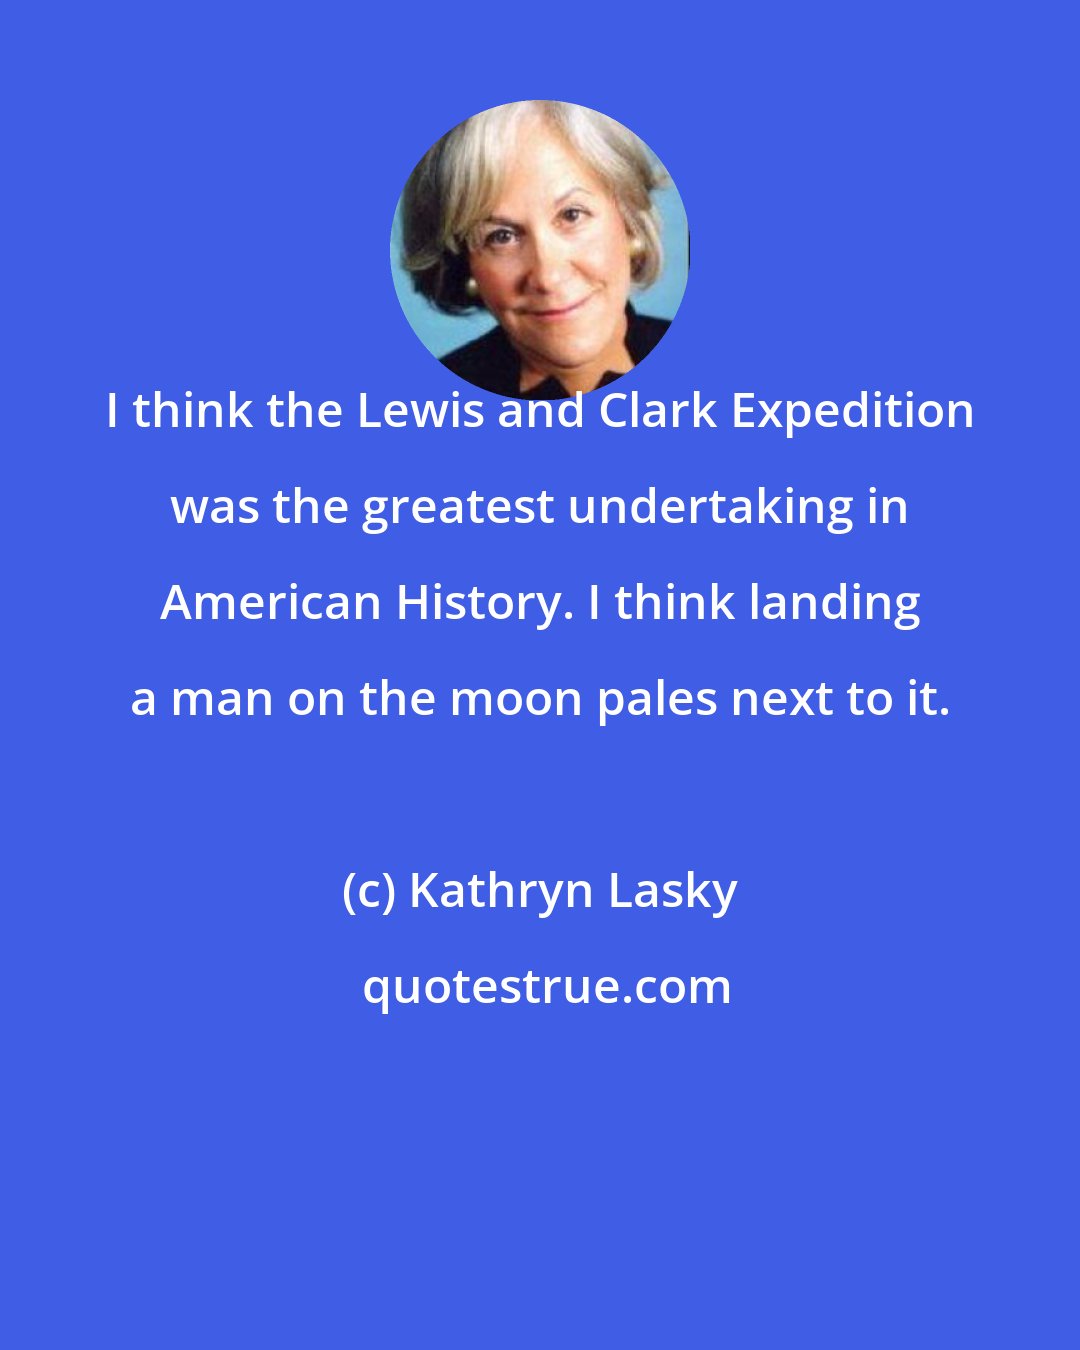 Kathryn Lasky: I think the Lewis and Clark Expedition was the greatest undertaking in American History. I think landing a man on the moon pales next to it.